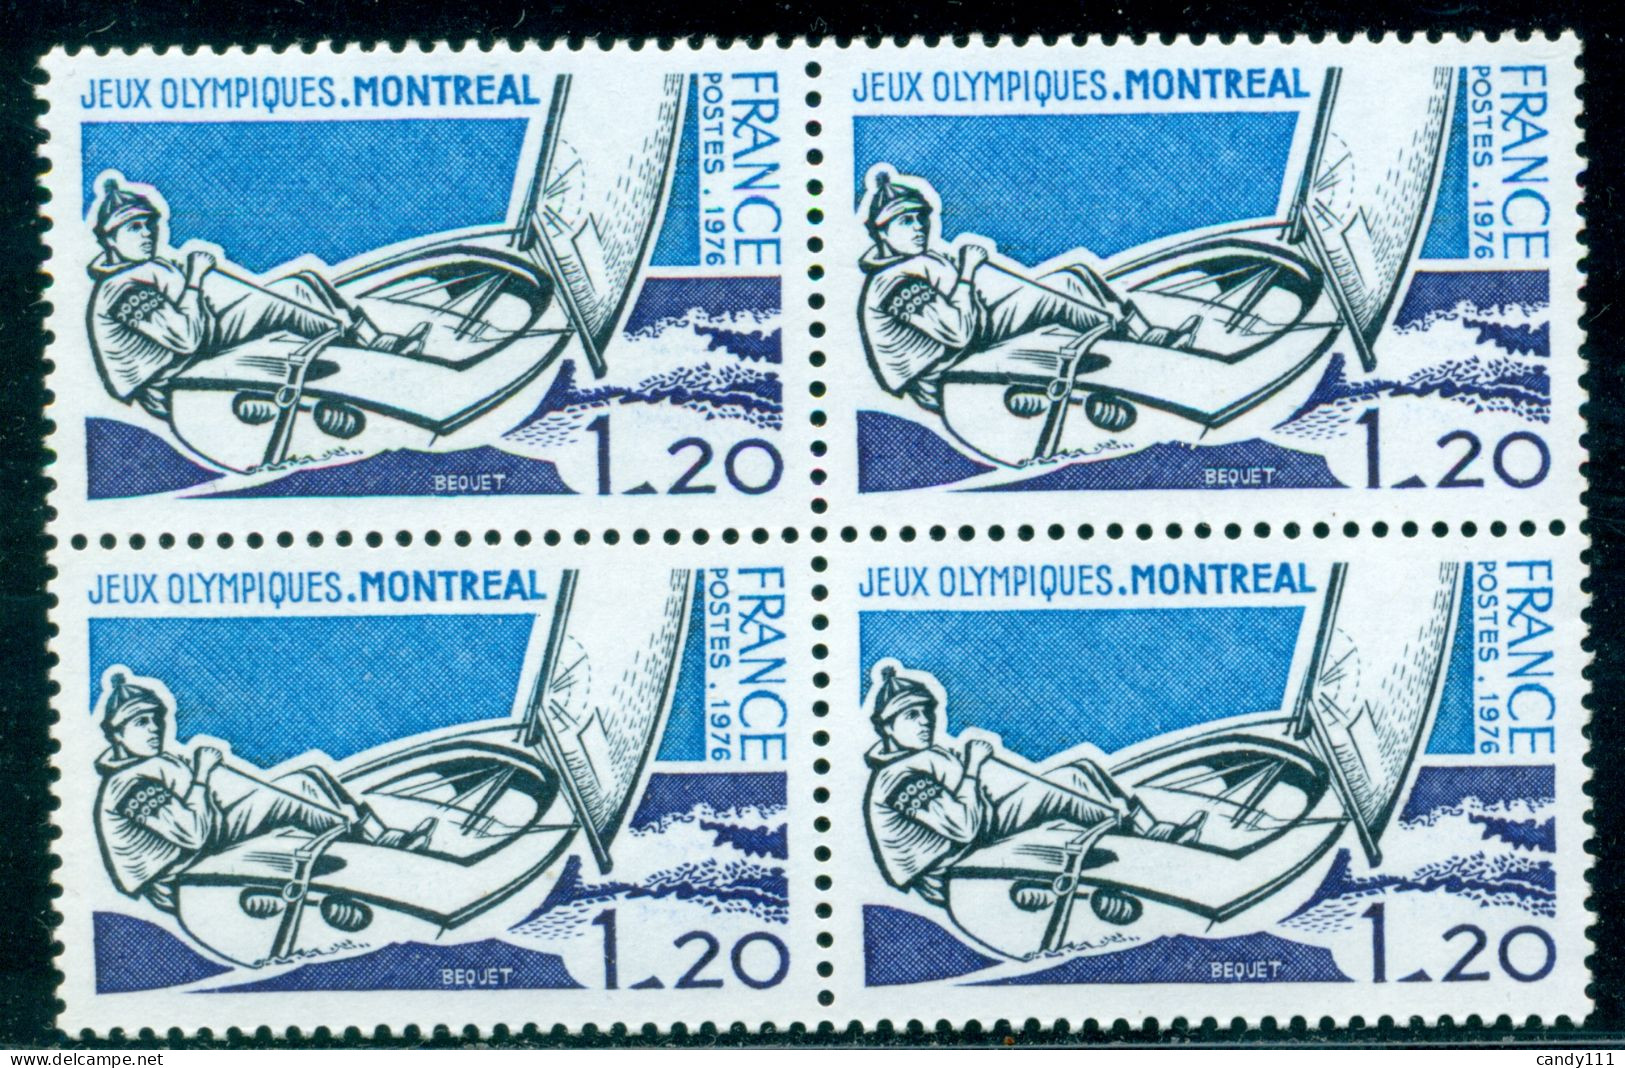 1976 Montreal Olympics,sailing Race,boat,France,1980, MNH X4 - Sommer 1976: Montreal